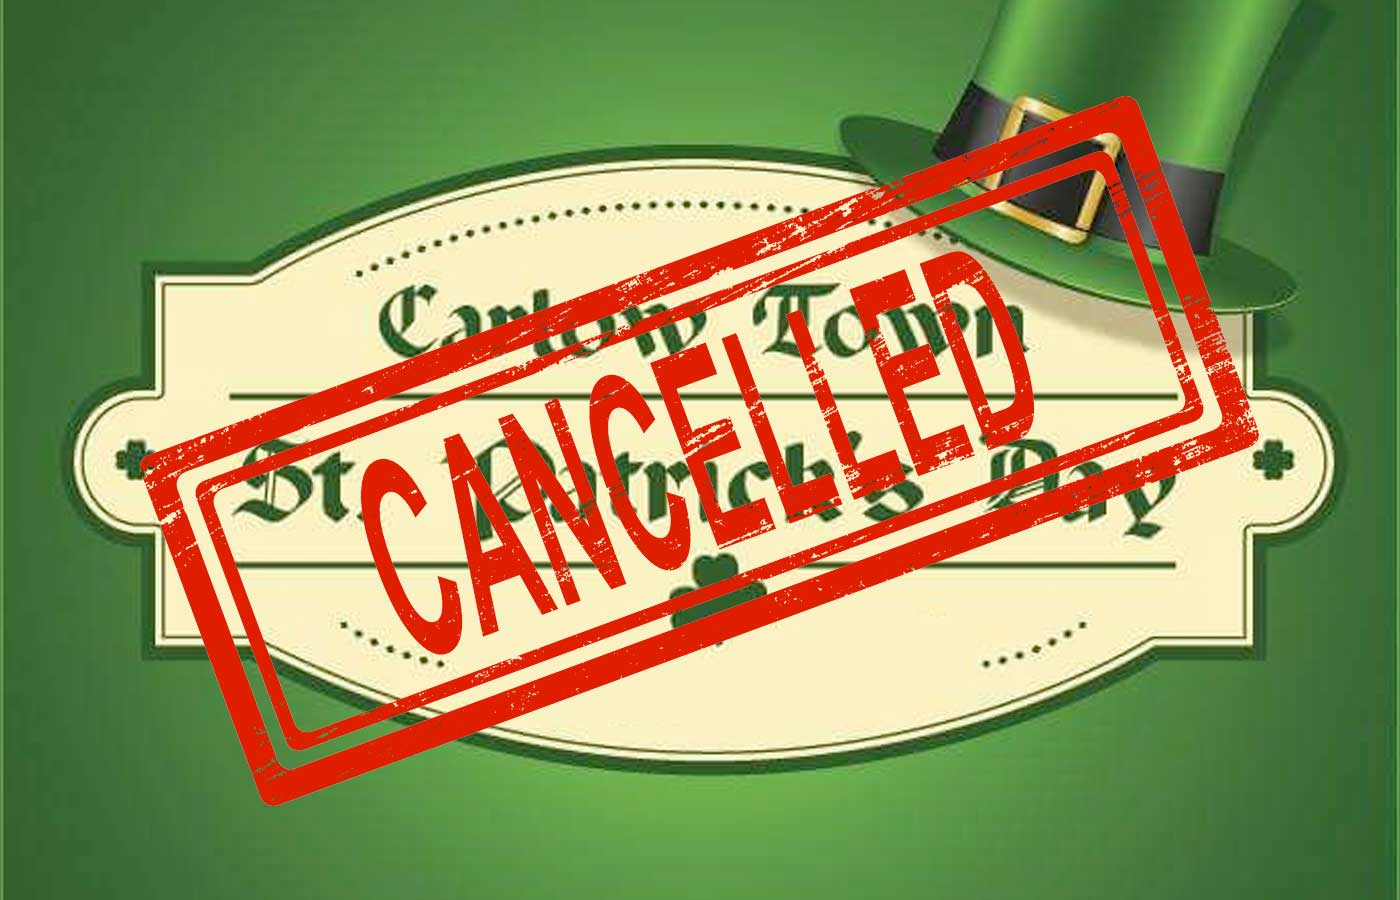 Carlow town parade, cancelled.